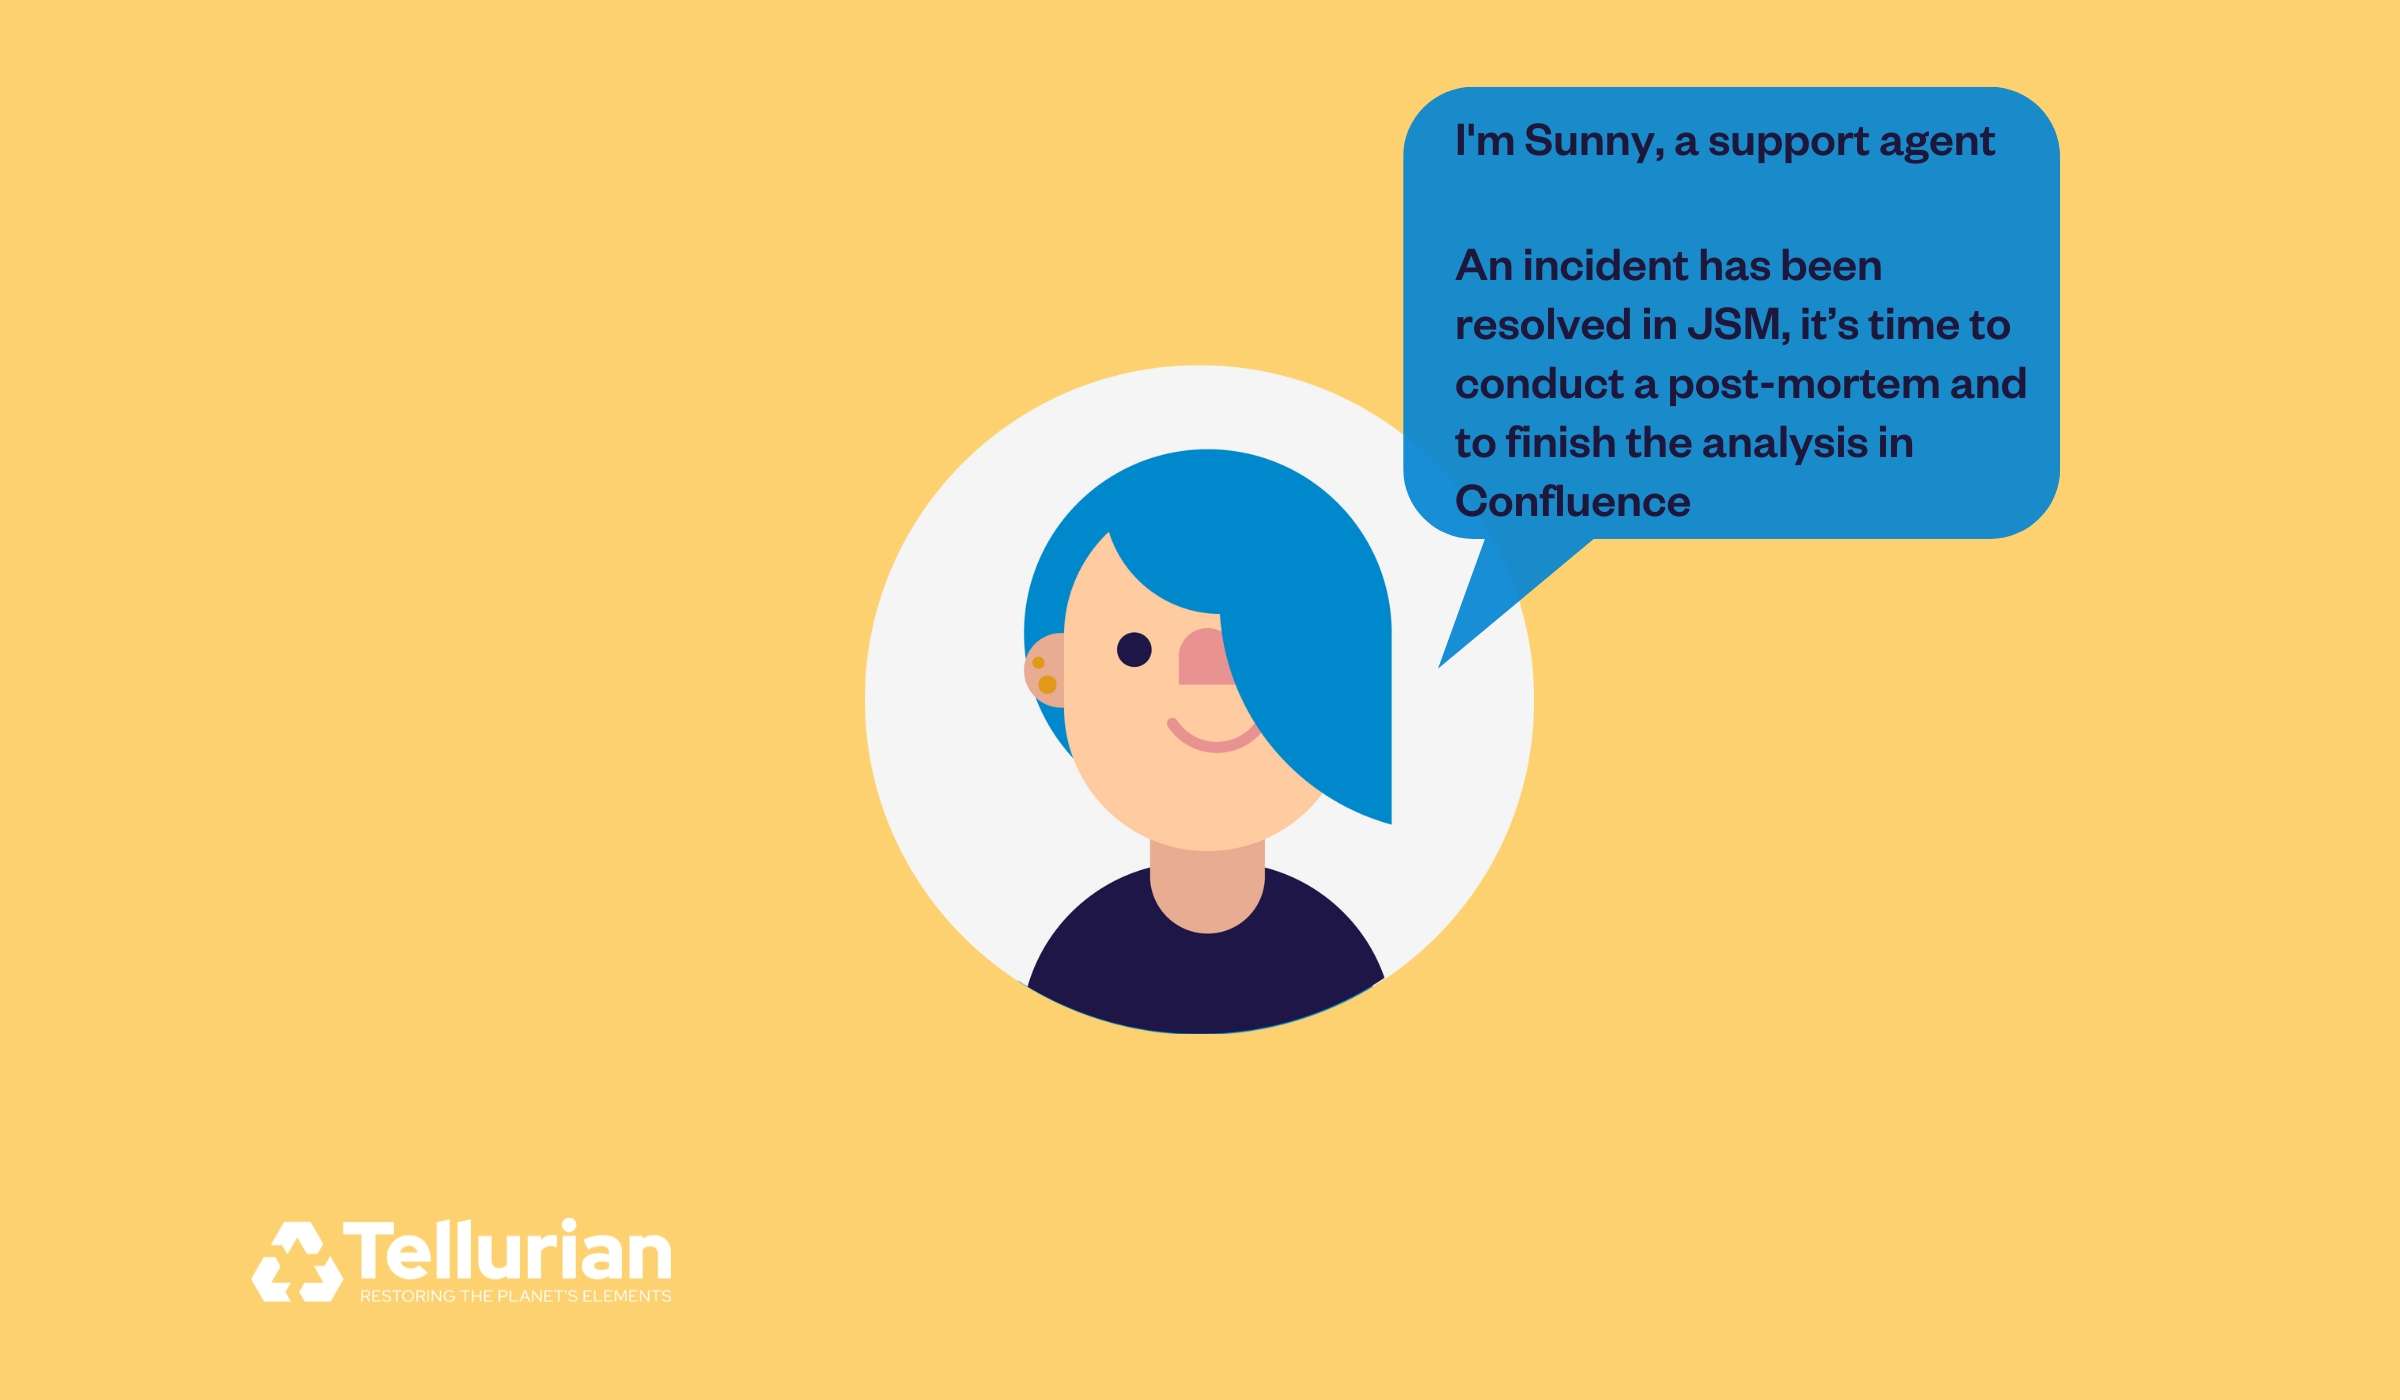 Meet Sunny, Support Agent at Tellurian, who needs to complete a post-mortem report after resolving an incident in order to prevent future outages.